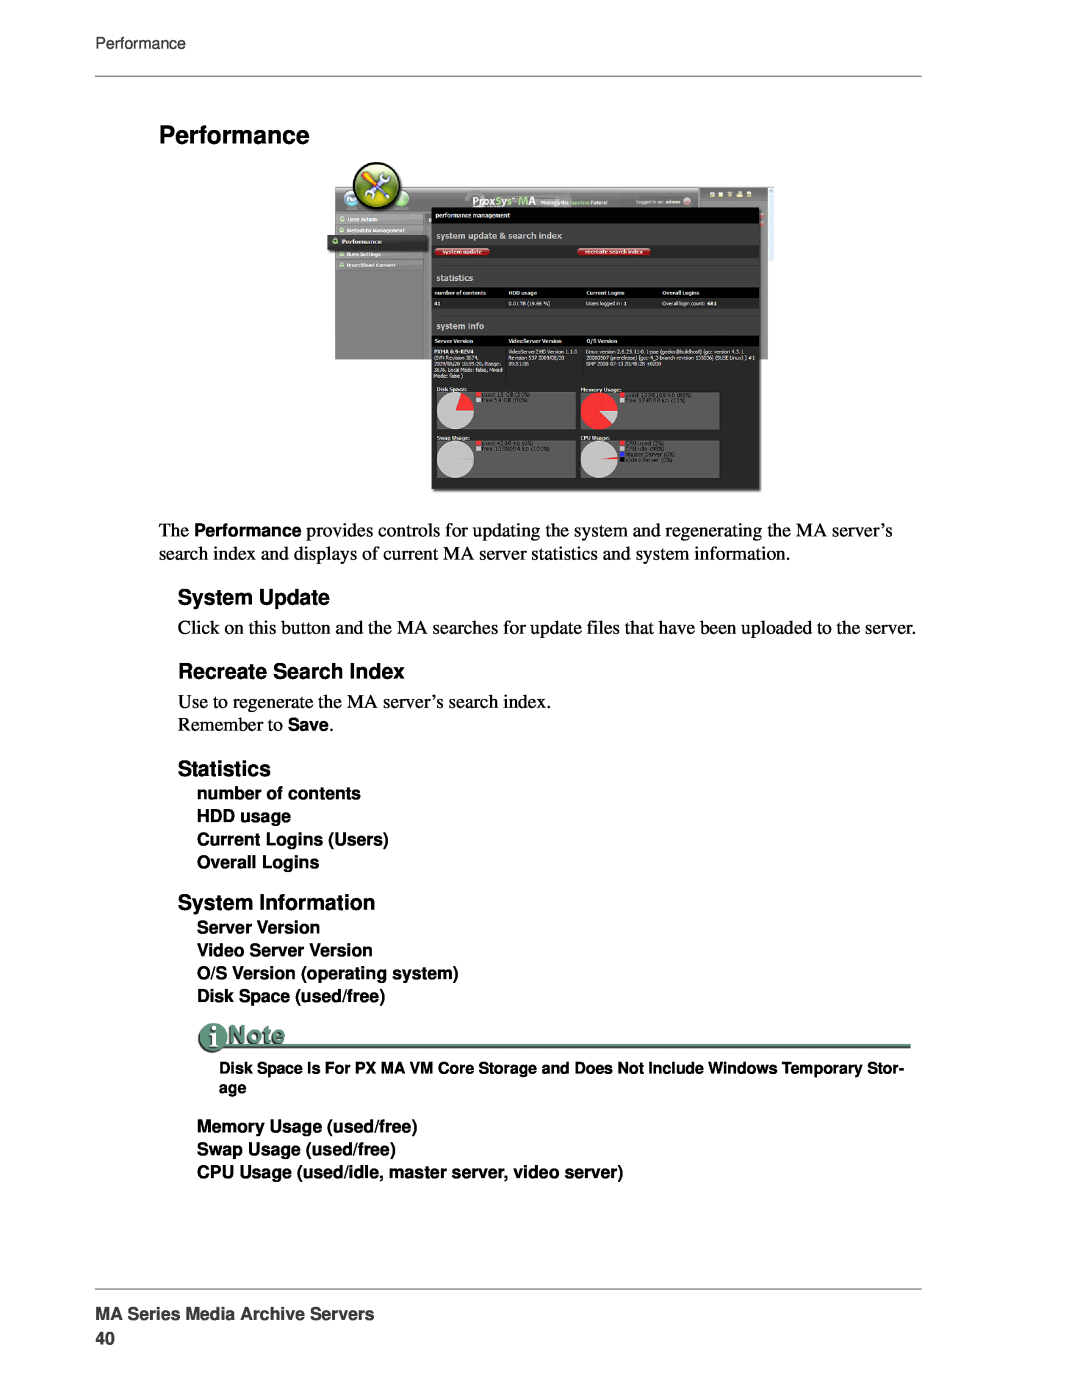 FOCUS Enhancements MANL-1161-04 manual Performance, System Update, Recreate Search Index, Statistics, System Information 